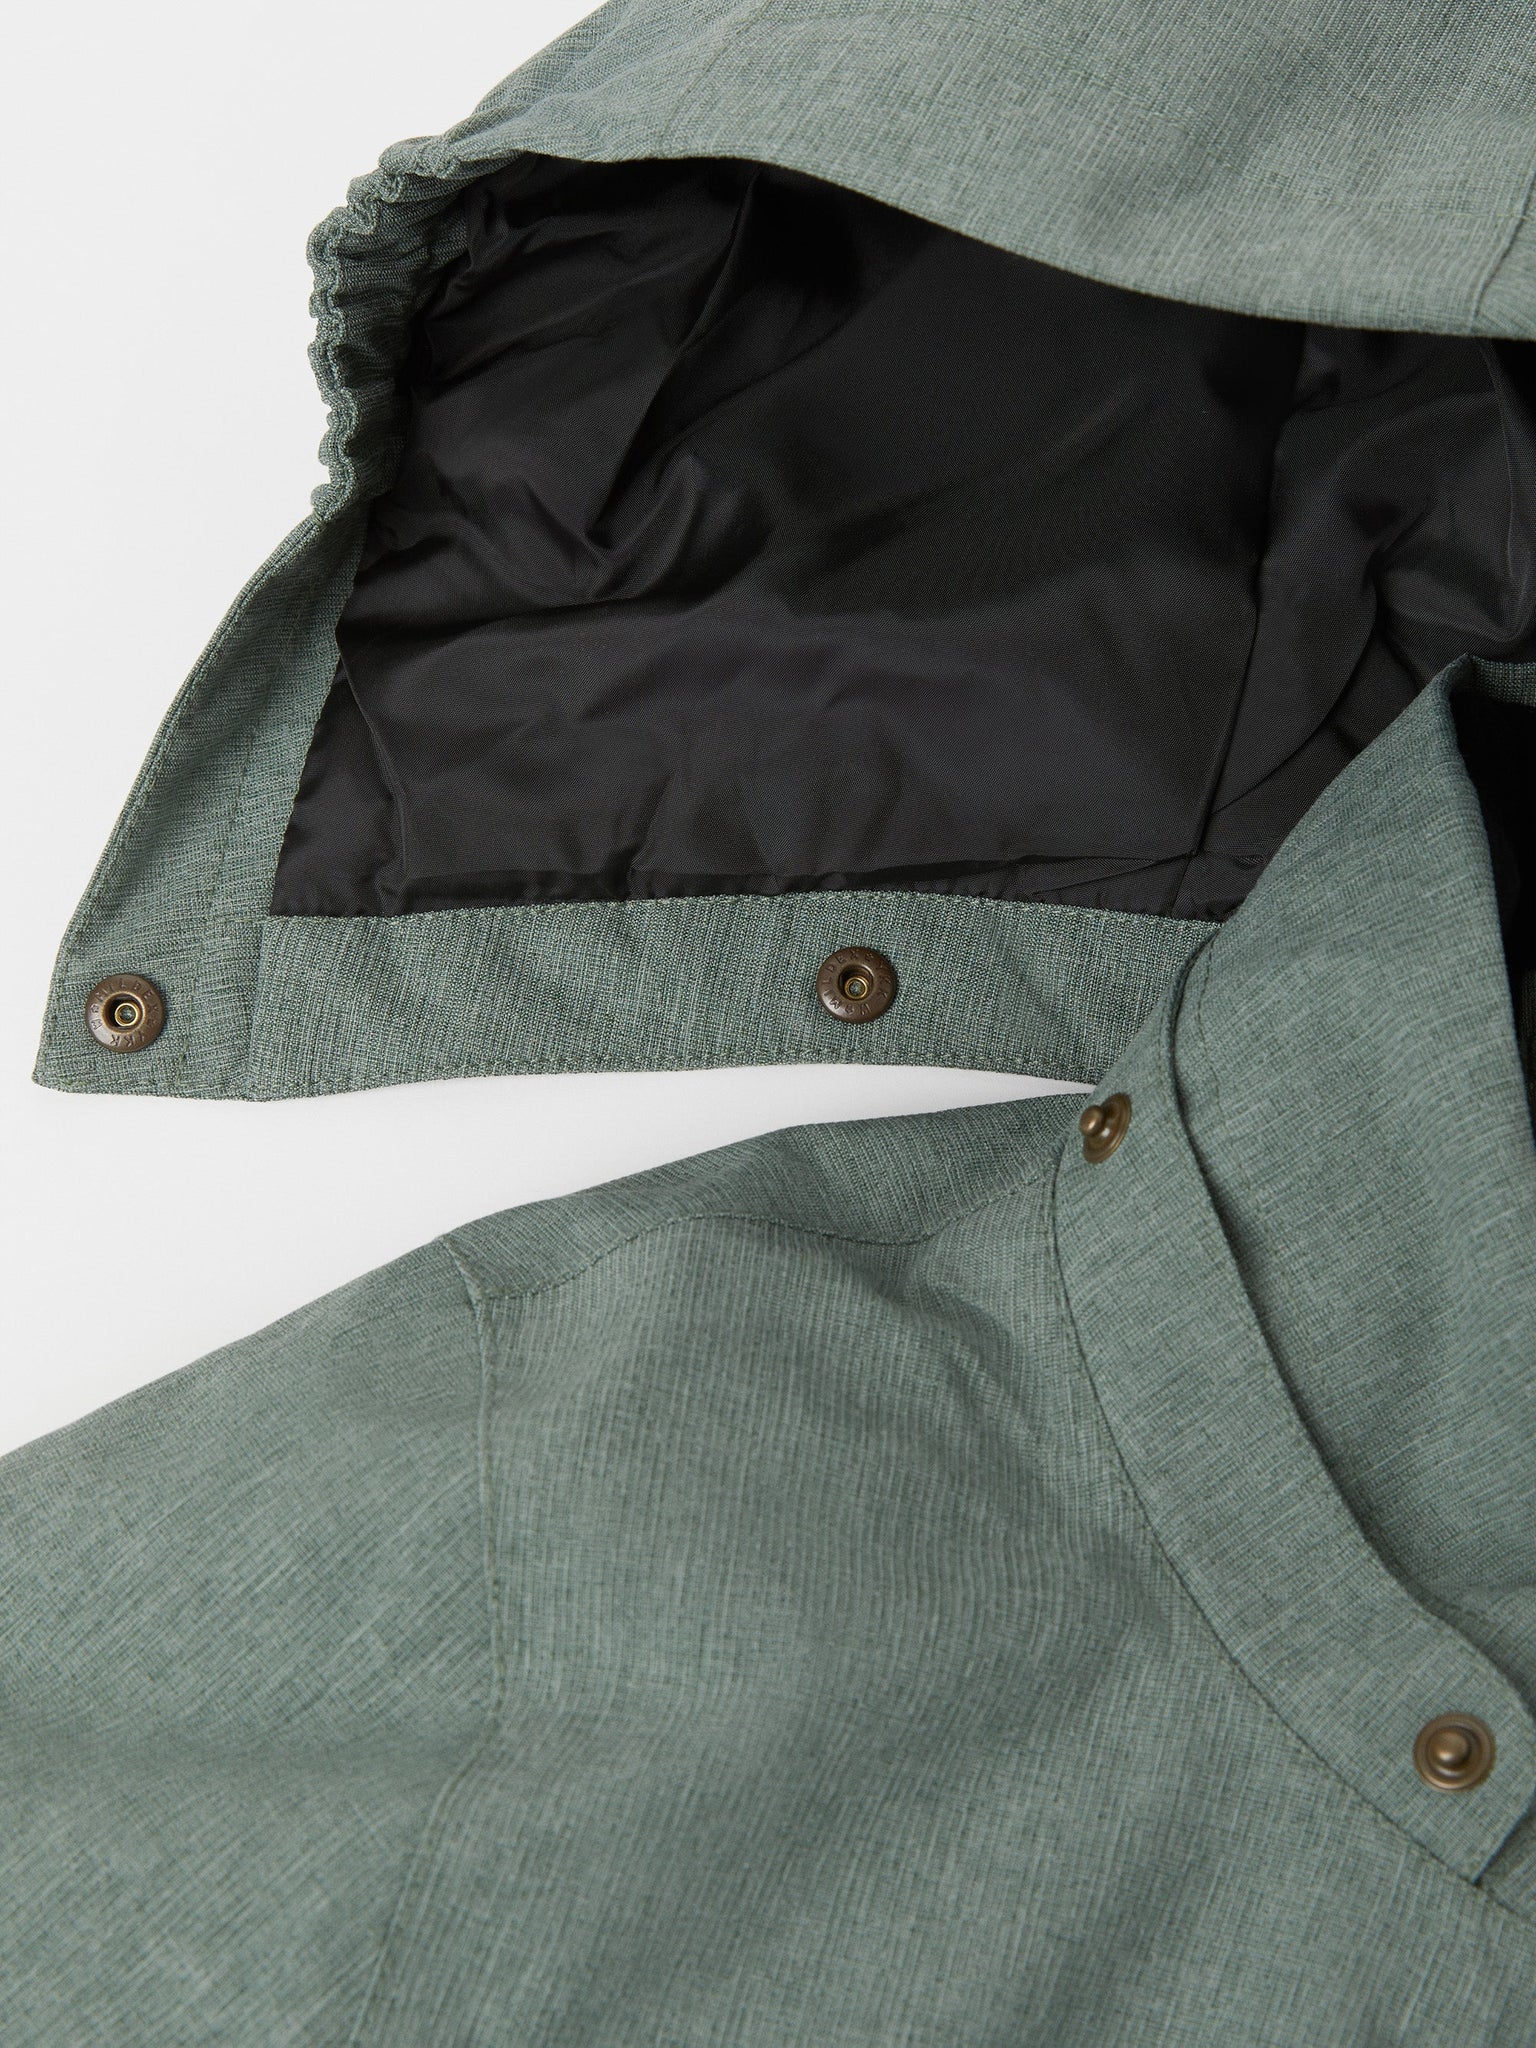 Green Kids Padded Waterproof Coat from the Polarn O. Pyret outerwear collection. Made using ethically sourced materials.